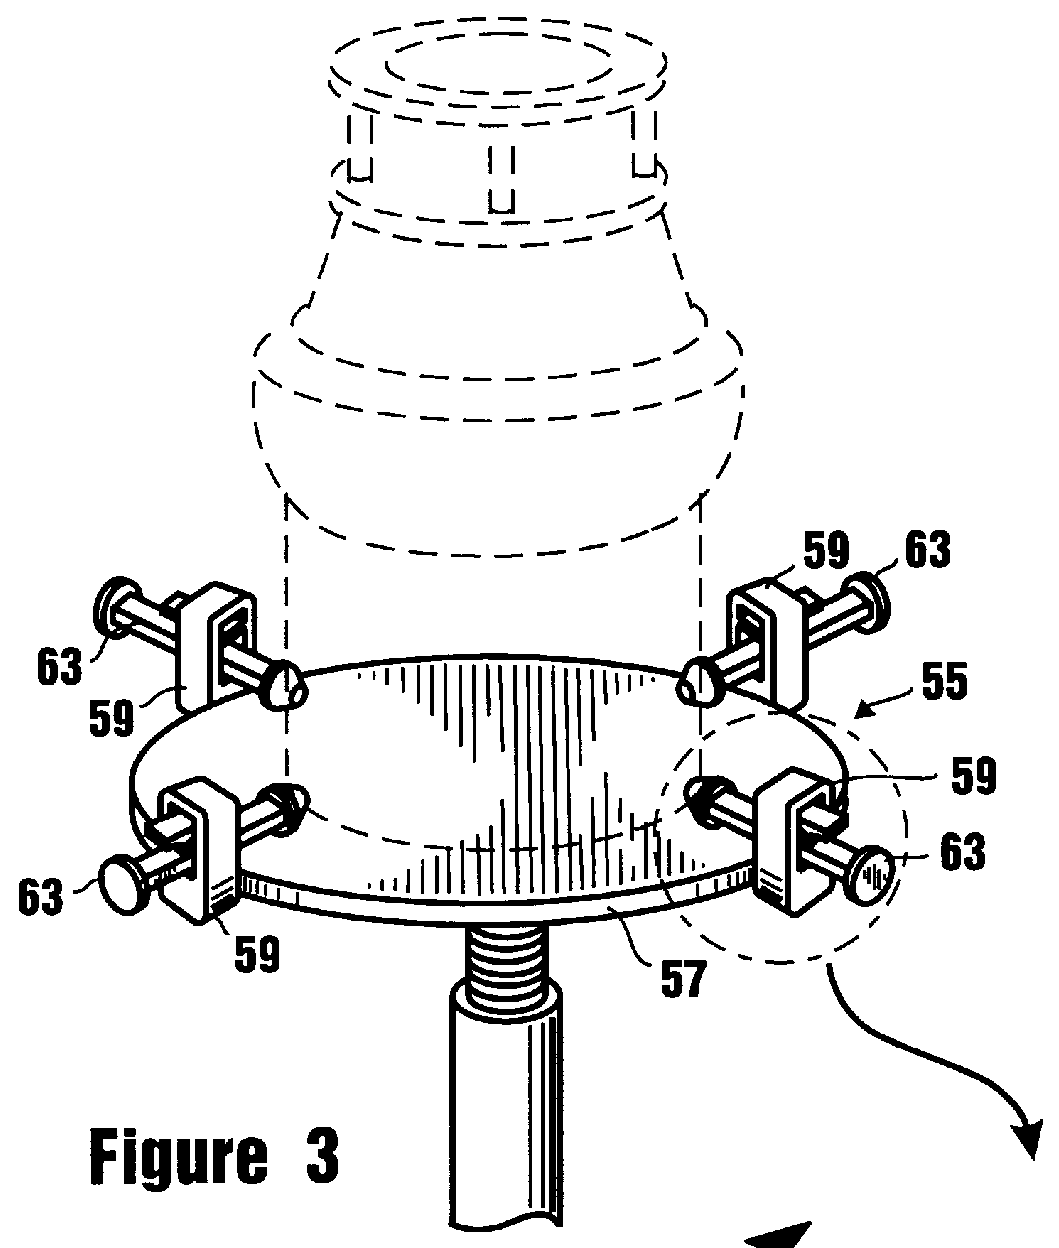 Method and apparatus for installing and removing a sink mounted garbage disposer